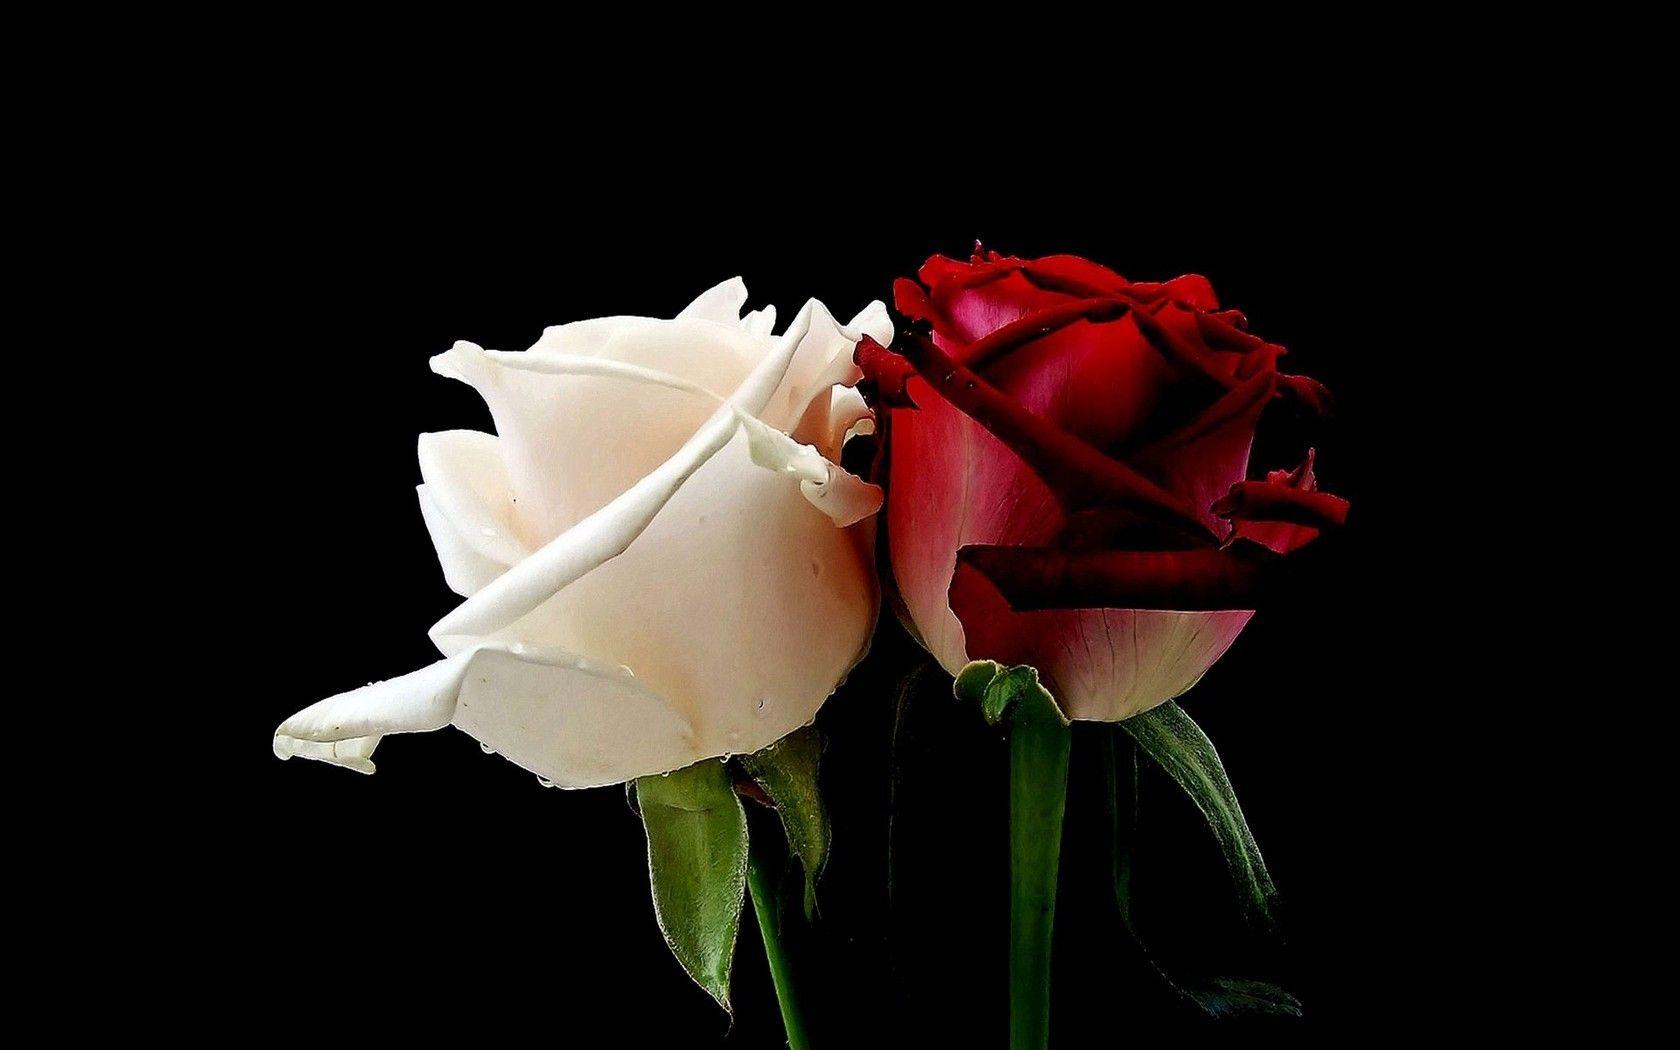 Flower Red Rose With Black Background HD Wallpaper Background